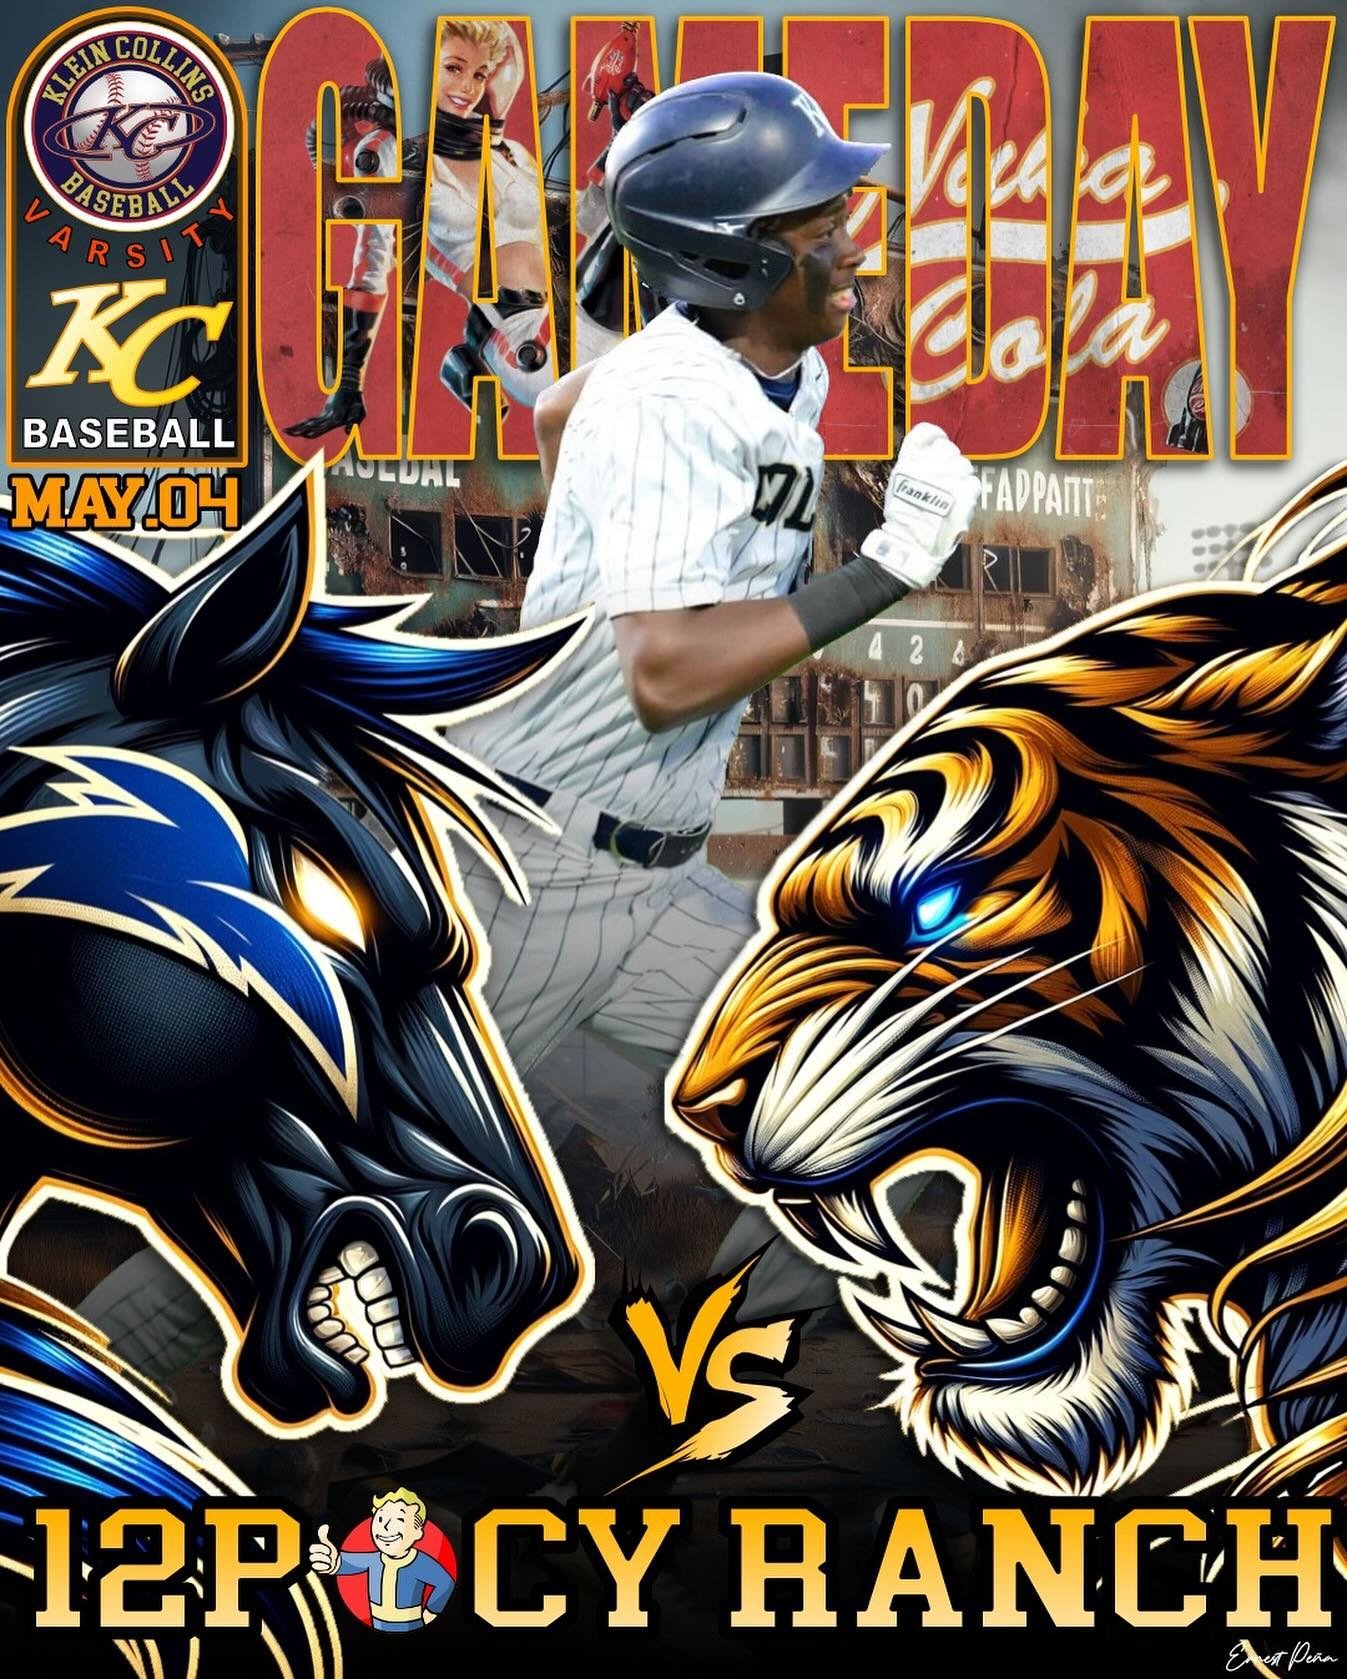 Tie breaker today at noon! Come out and get loud! #game3 #bestof3 #tiebreaker #letsgo #kc #kleincollins #tigers #baseballboys⚾️ #highschoolbaseball #playoffs